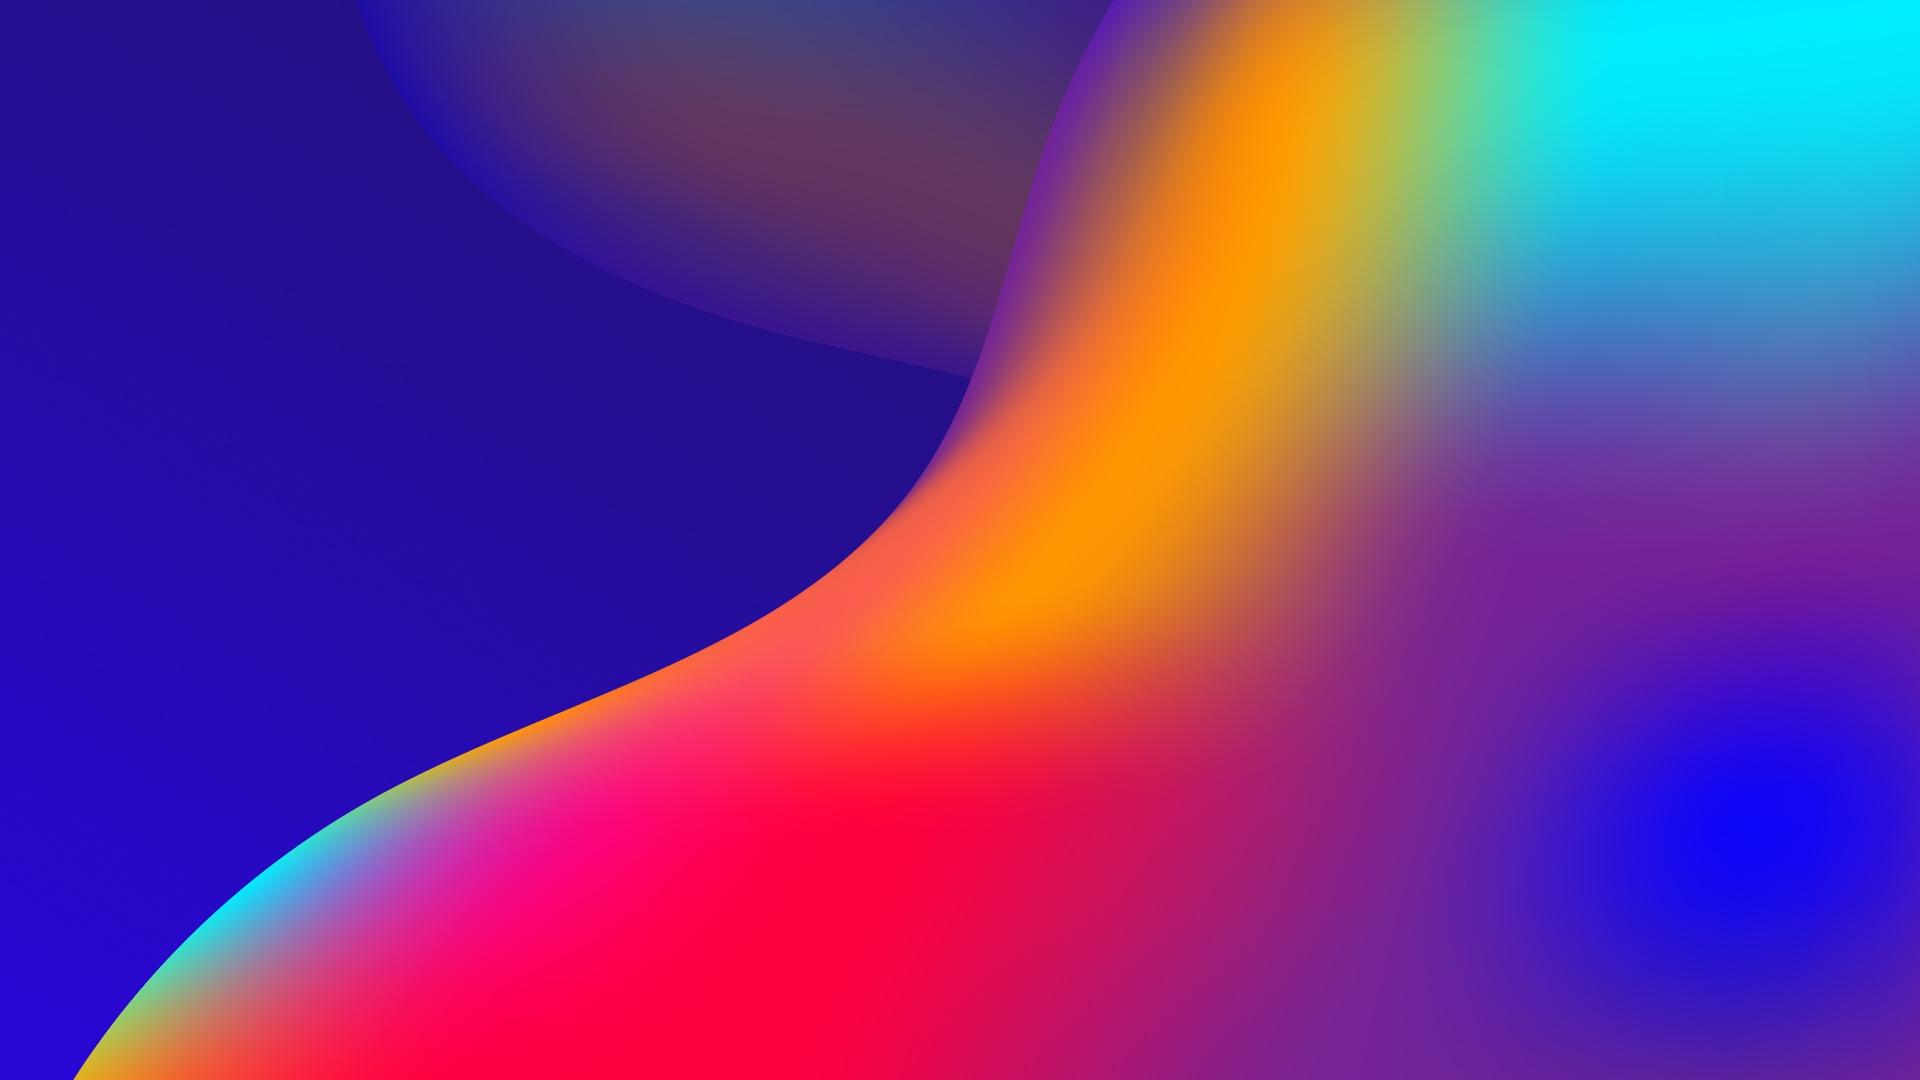 Download 1920x1080 Gradient Waves, Colorful Wallpaper